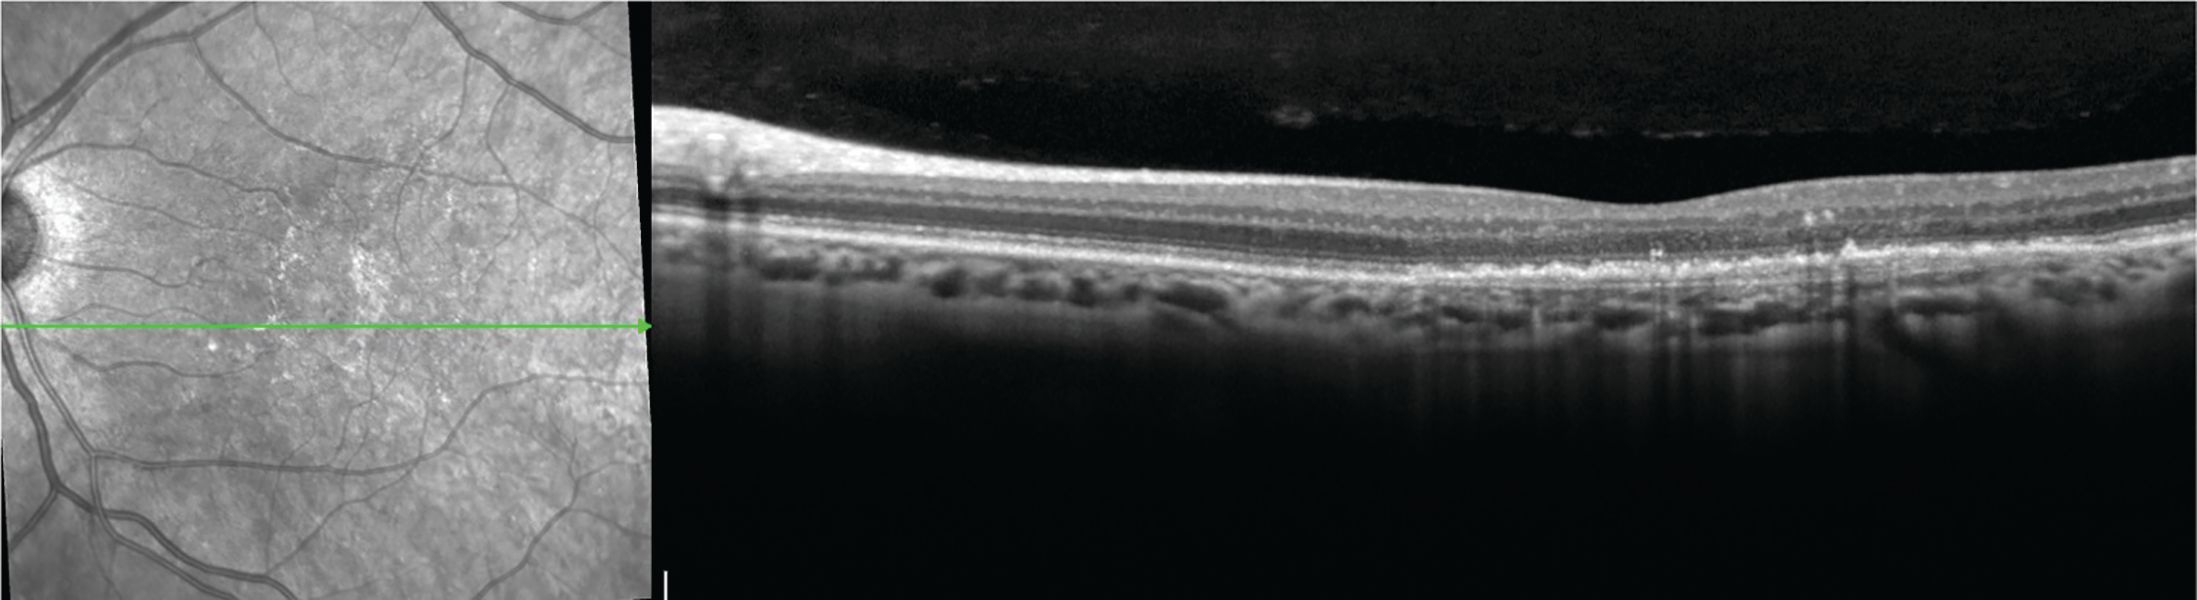 Figure 3. Double layer signs are an important optical coherence tomography (OCT) biomarker.